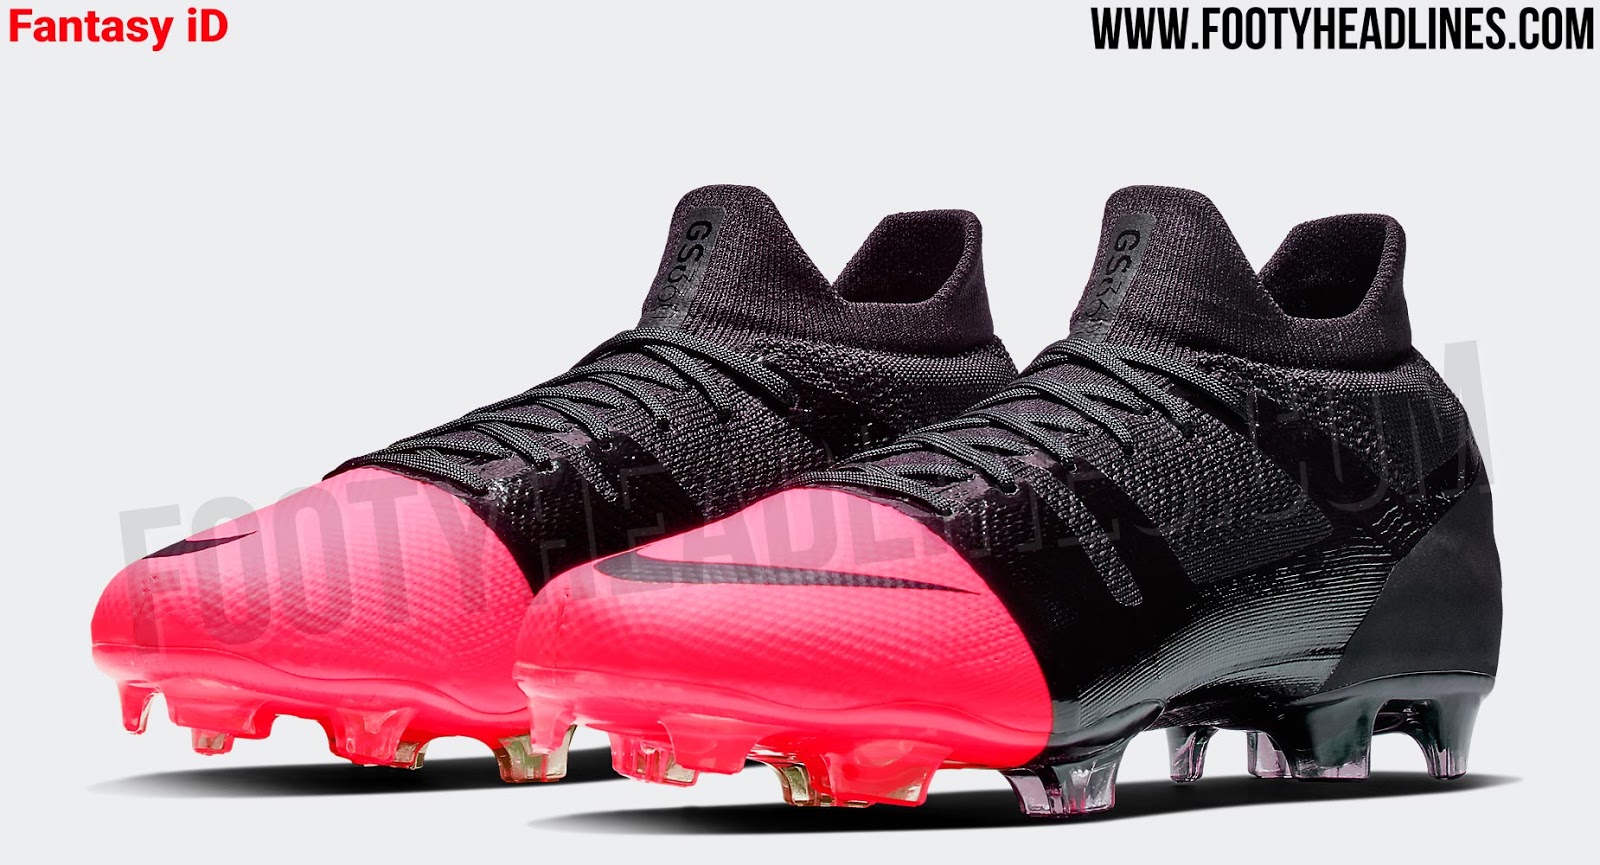 Exclusive: Nike to Release Nike Mercurial GS360 iD - Footy